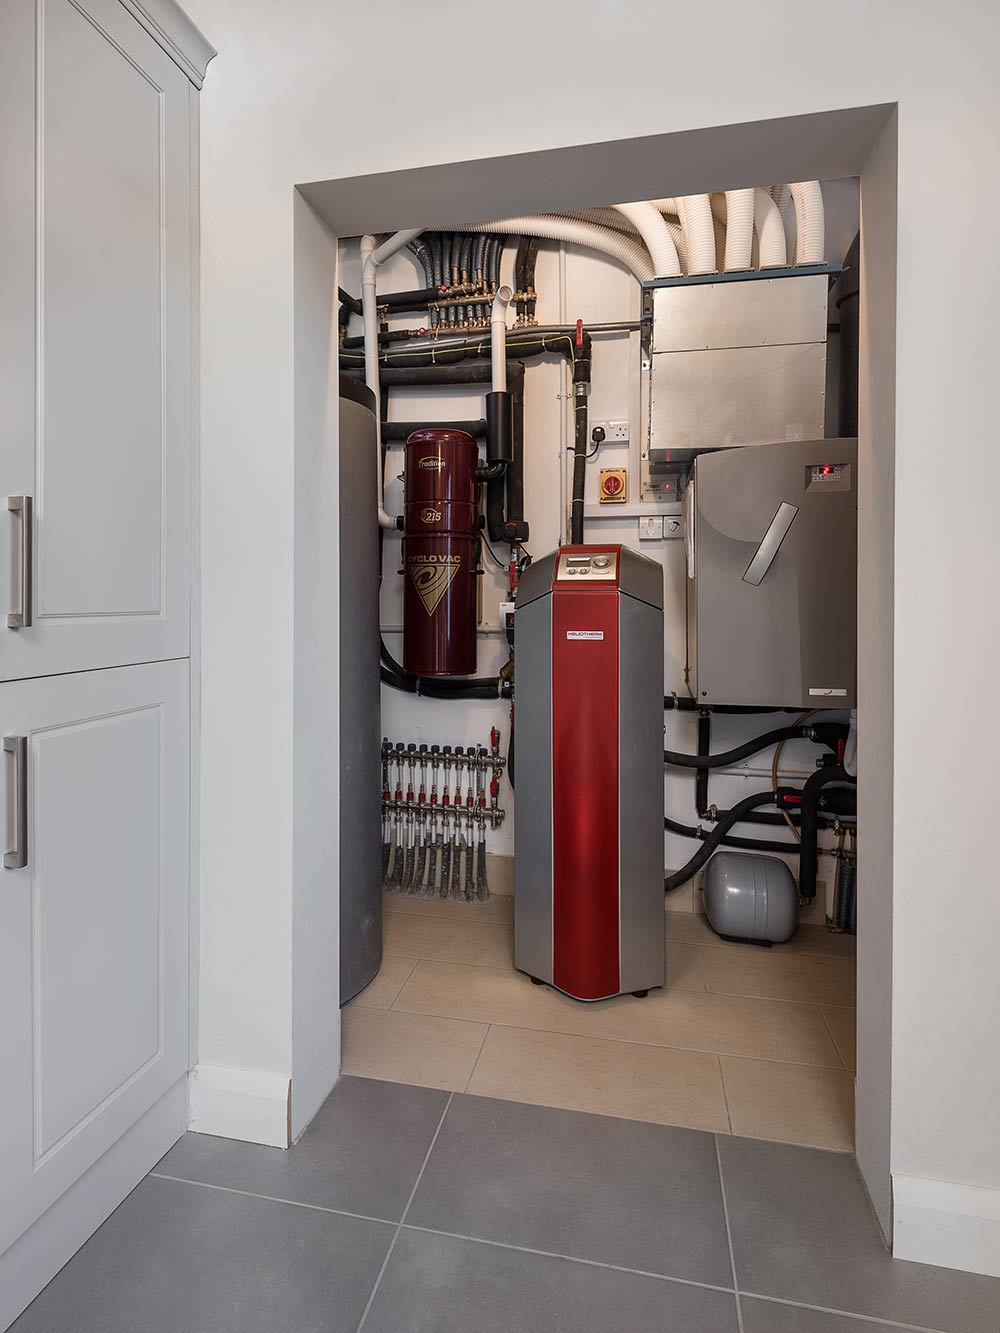 The house’s utility space includes the Zehnder Comfoair 550 heat recovery ventilation system, the Heliotherm brine-to-water heat pump that supplies underfloor heating on both floors, and a 500 litre domestic hot water tank with fresh hot water heat exchanger.